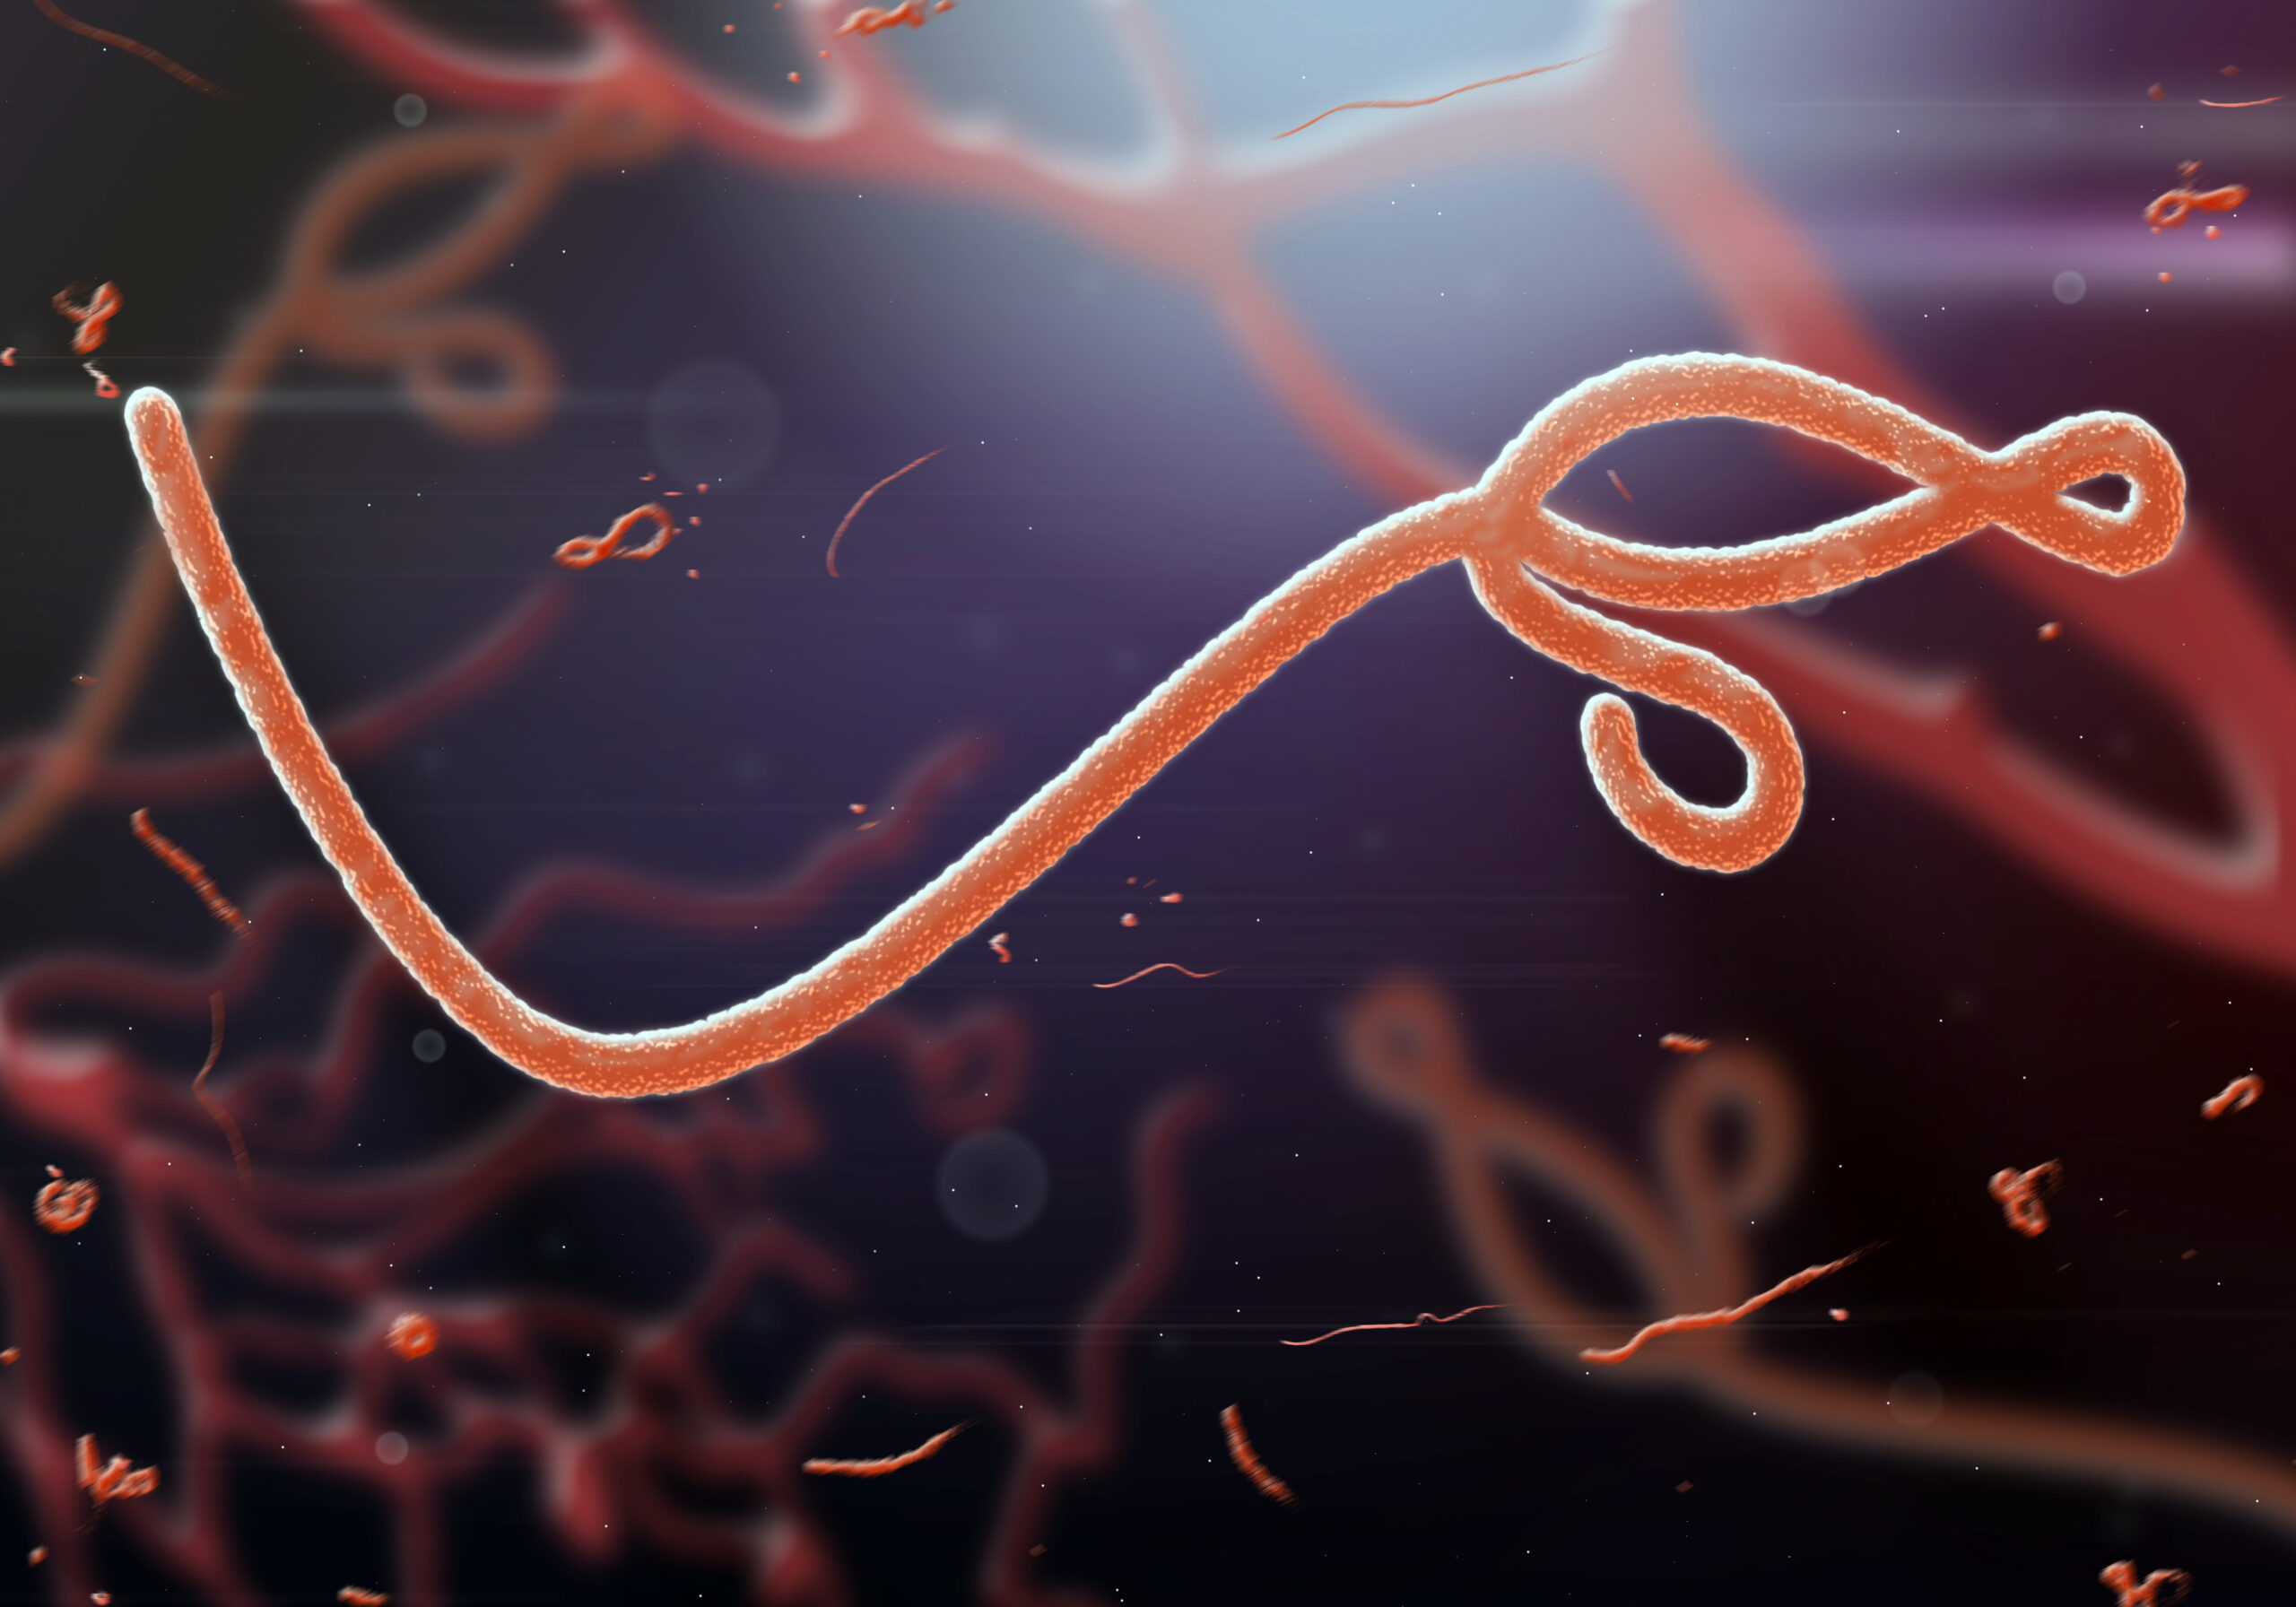 Ebola Virus Can Hide In Brain and Reinfect Patients